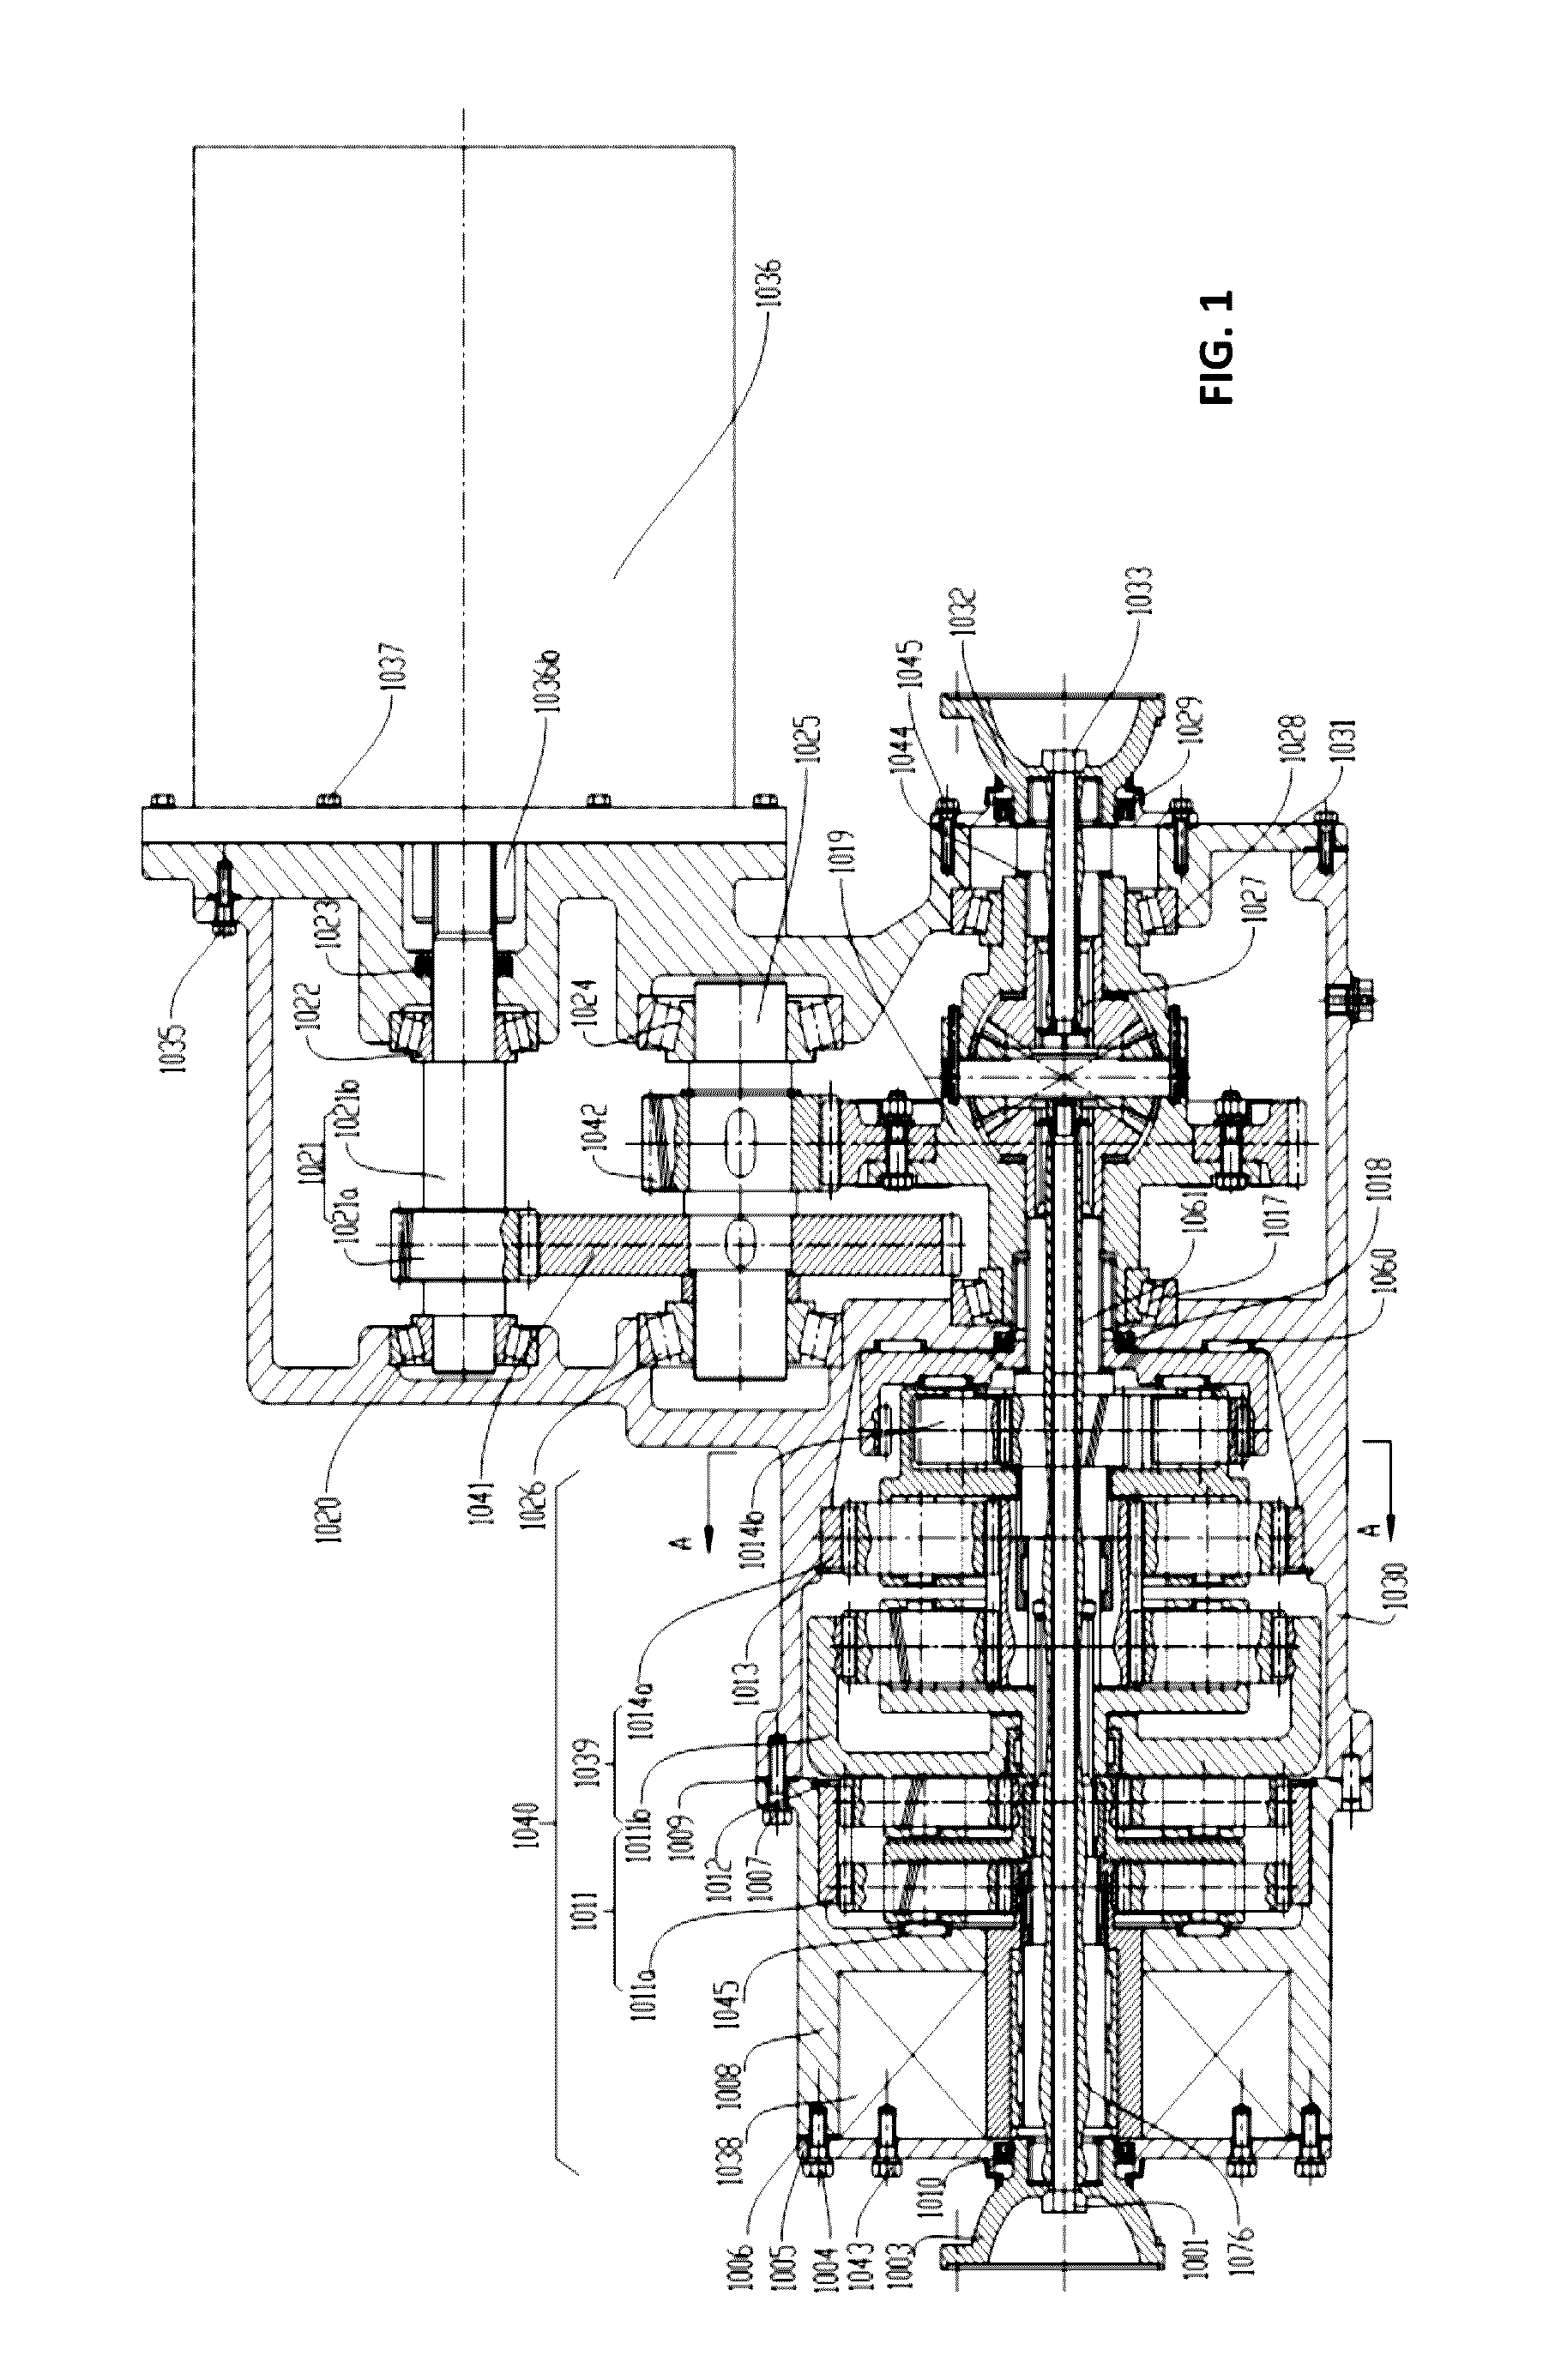 Drive axle of electric distribution torque